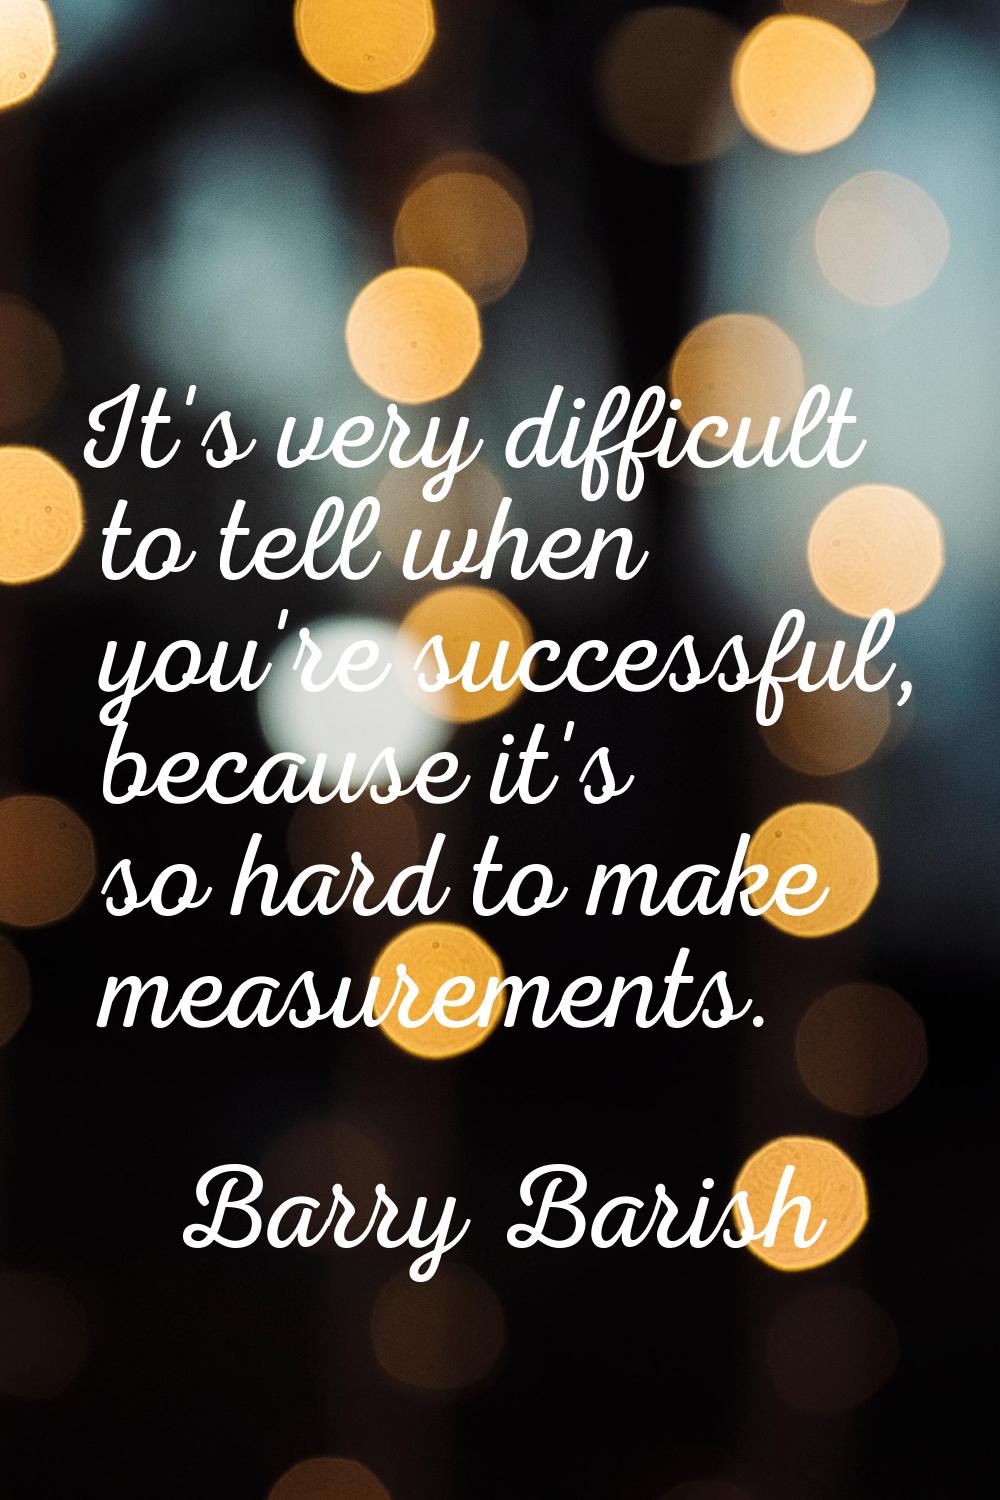 It's very difficult to tell when you're successful, because it's so hard to make measurements.